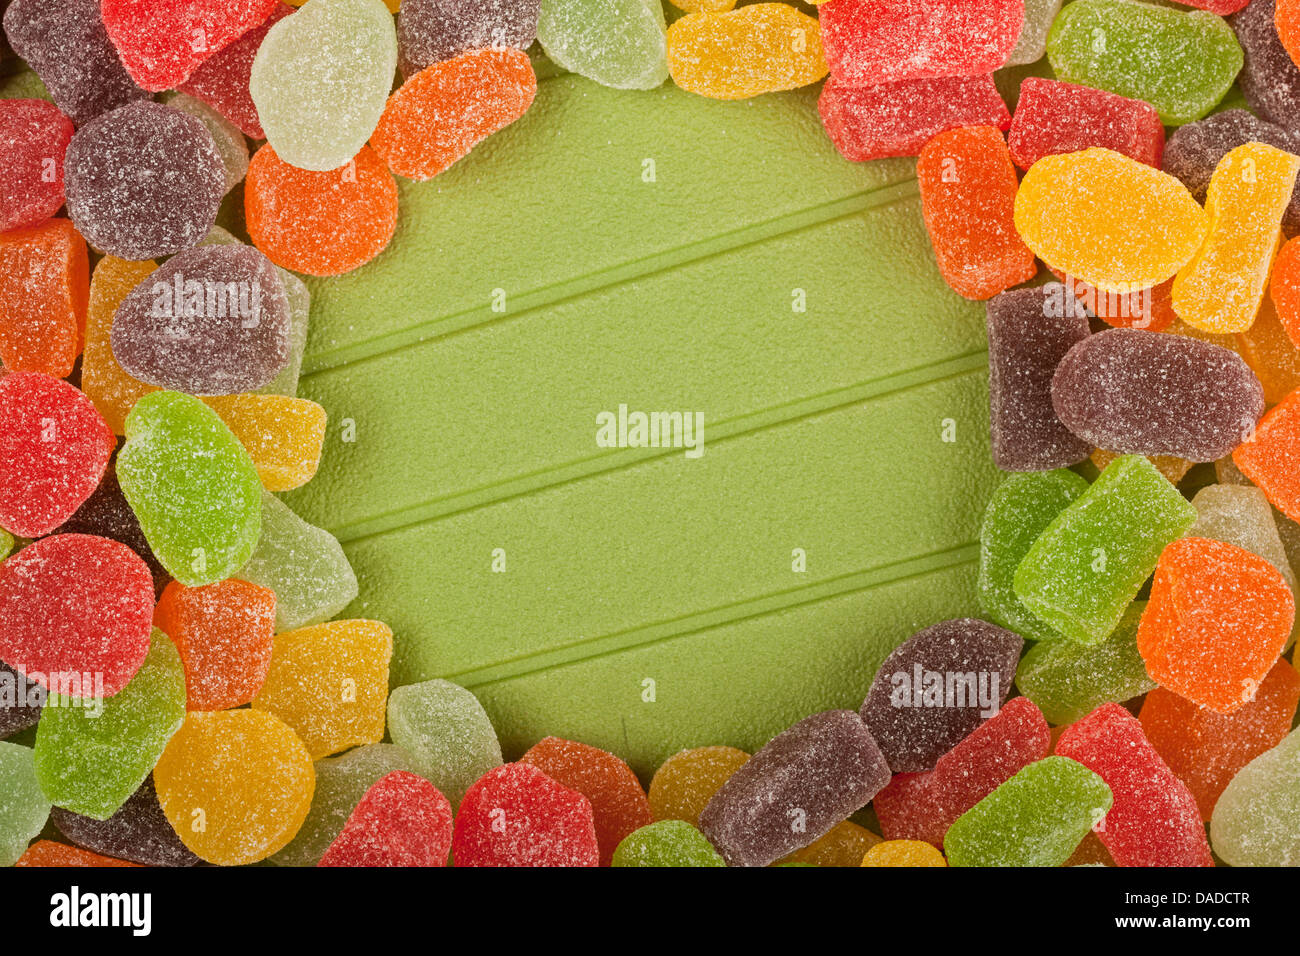 Gummy Candy High Resolution Stock Photography and Images - Alamy